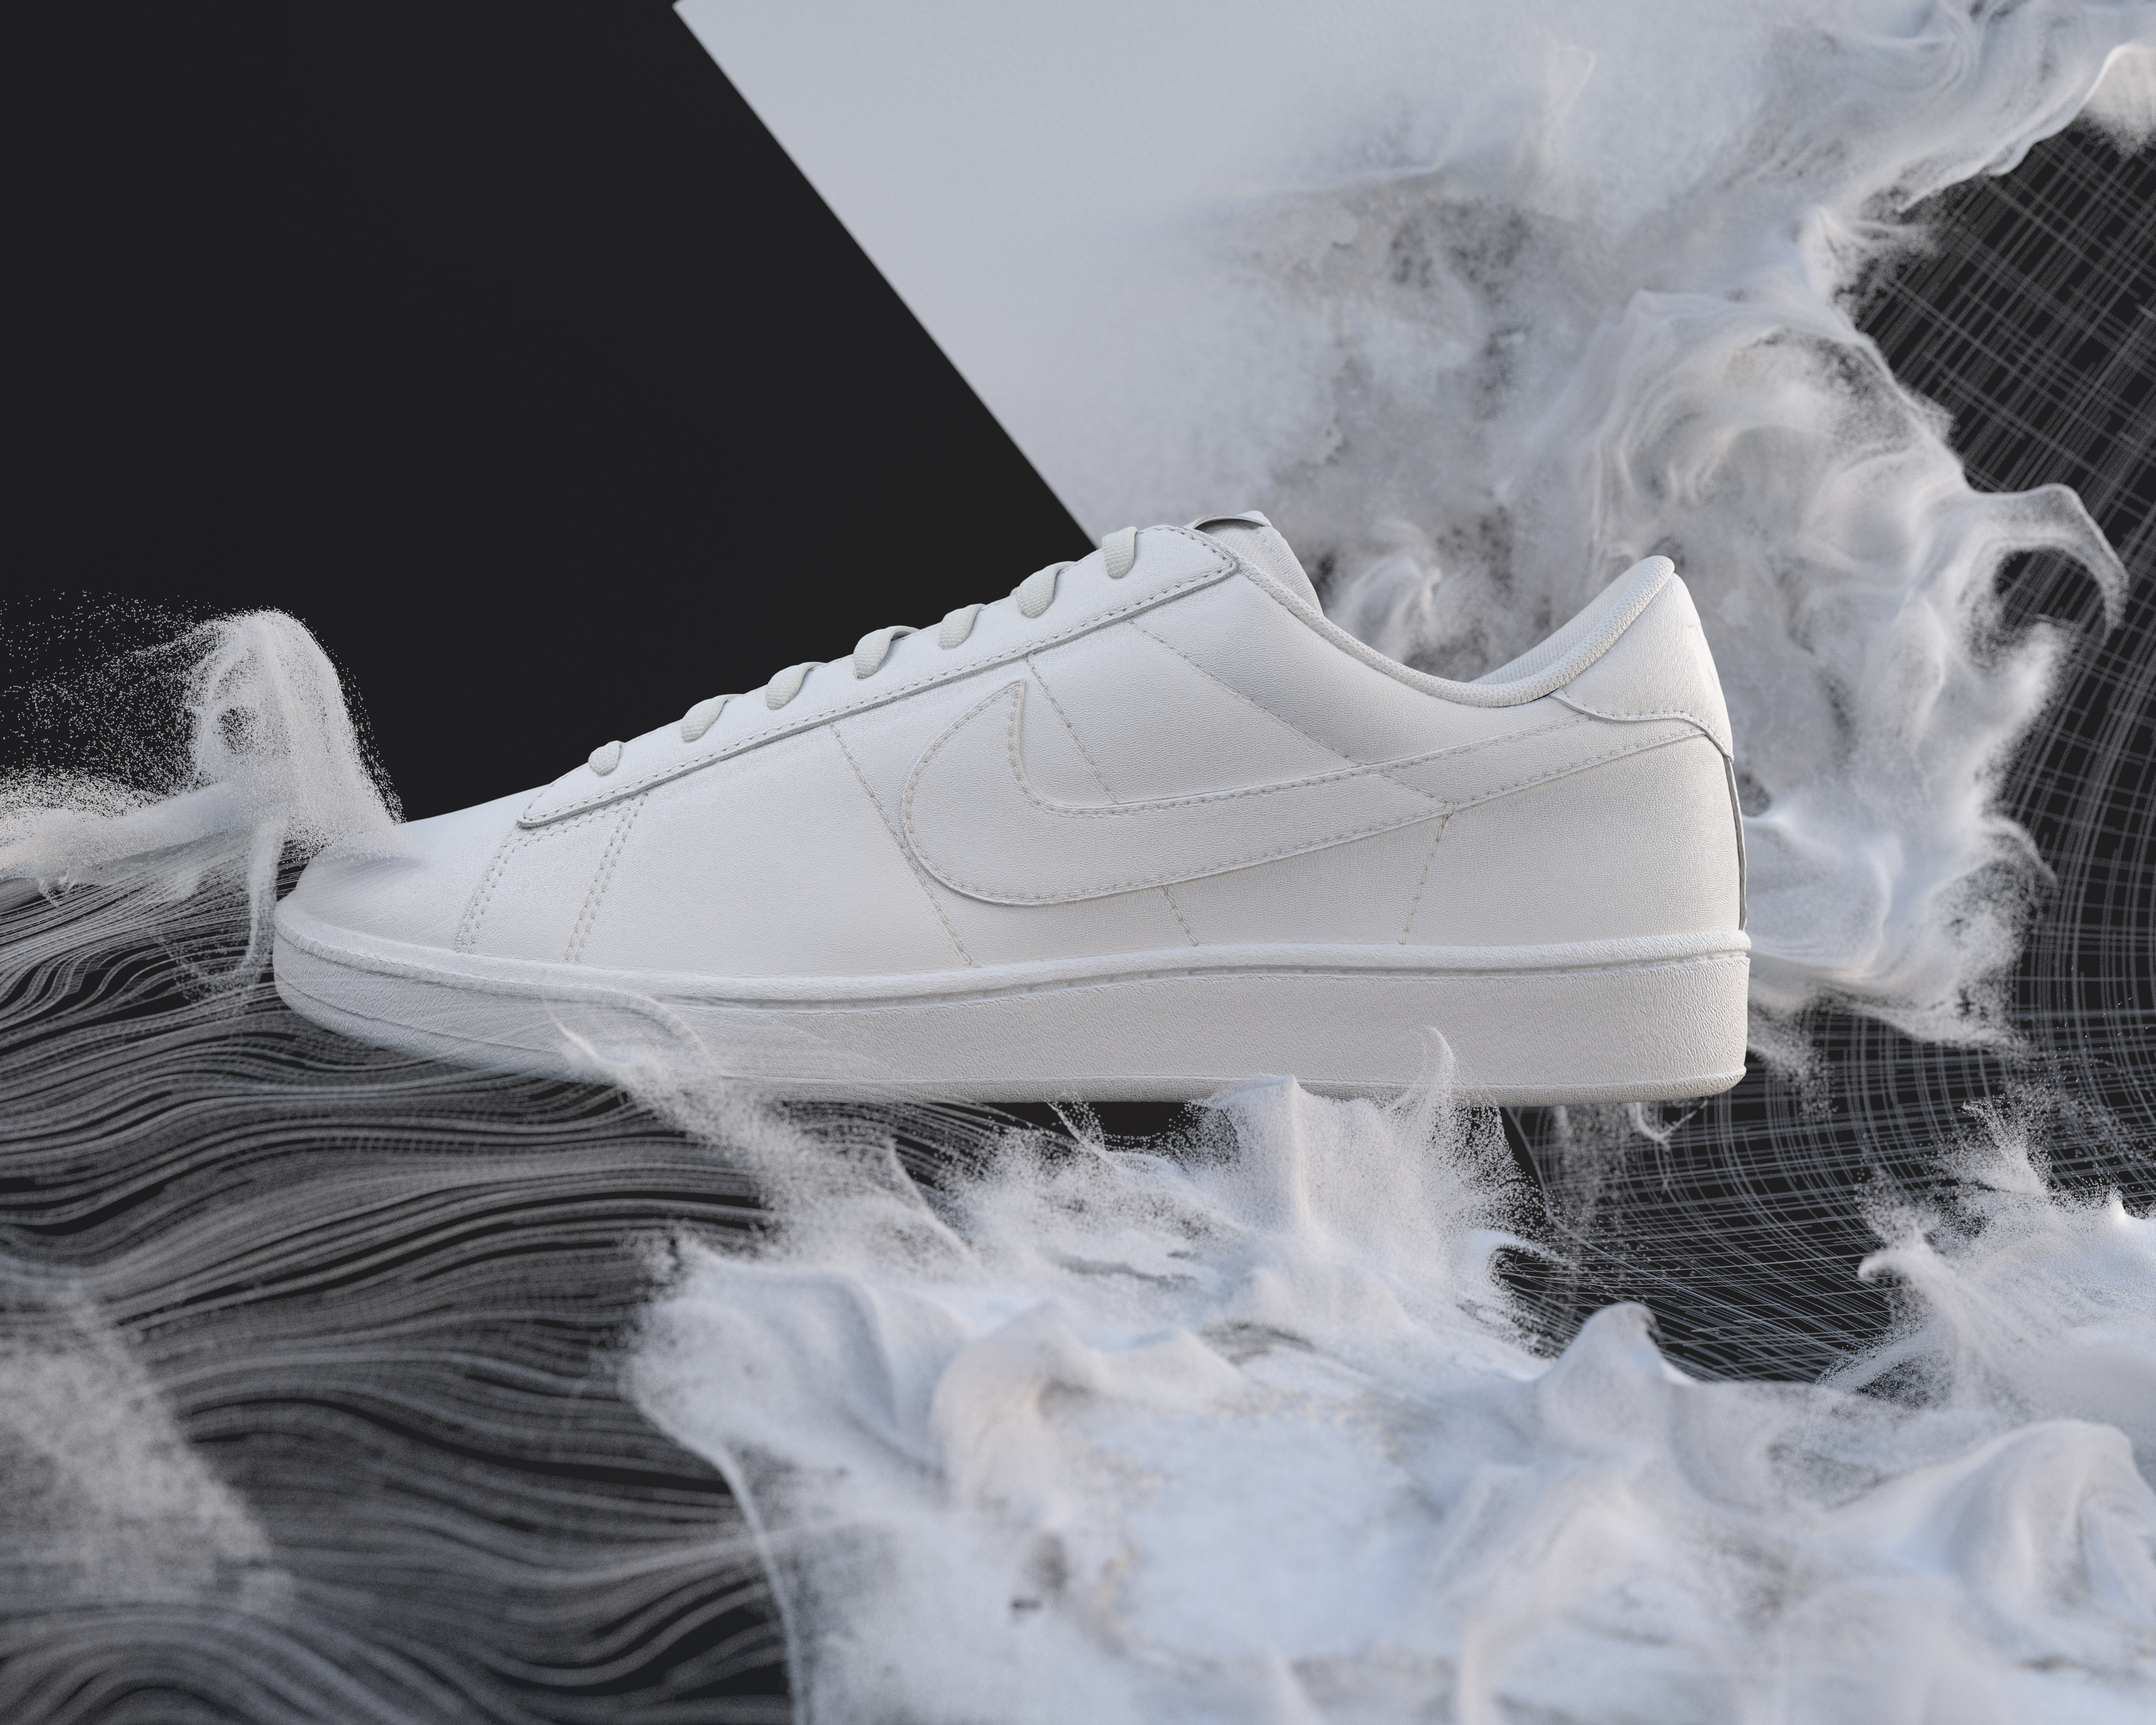 Nike Introduces Flyleather, a Material 